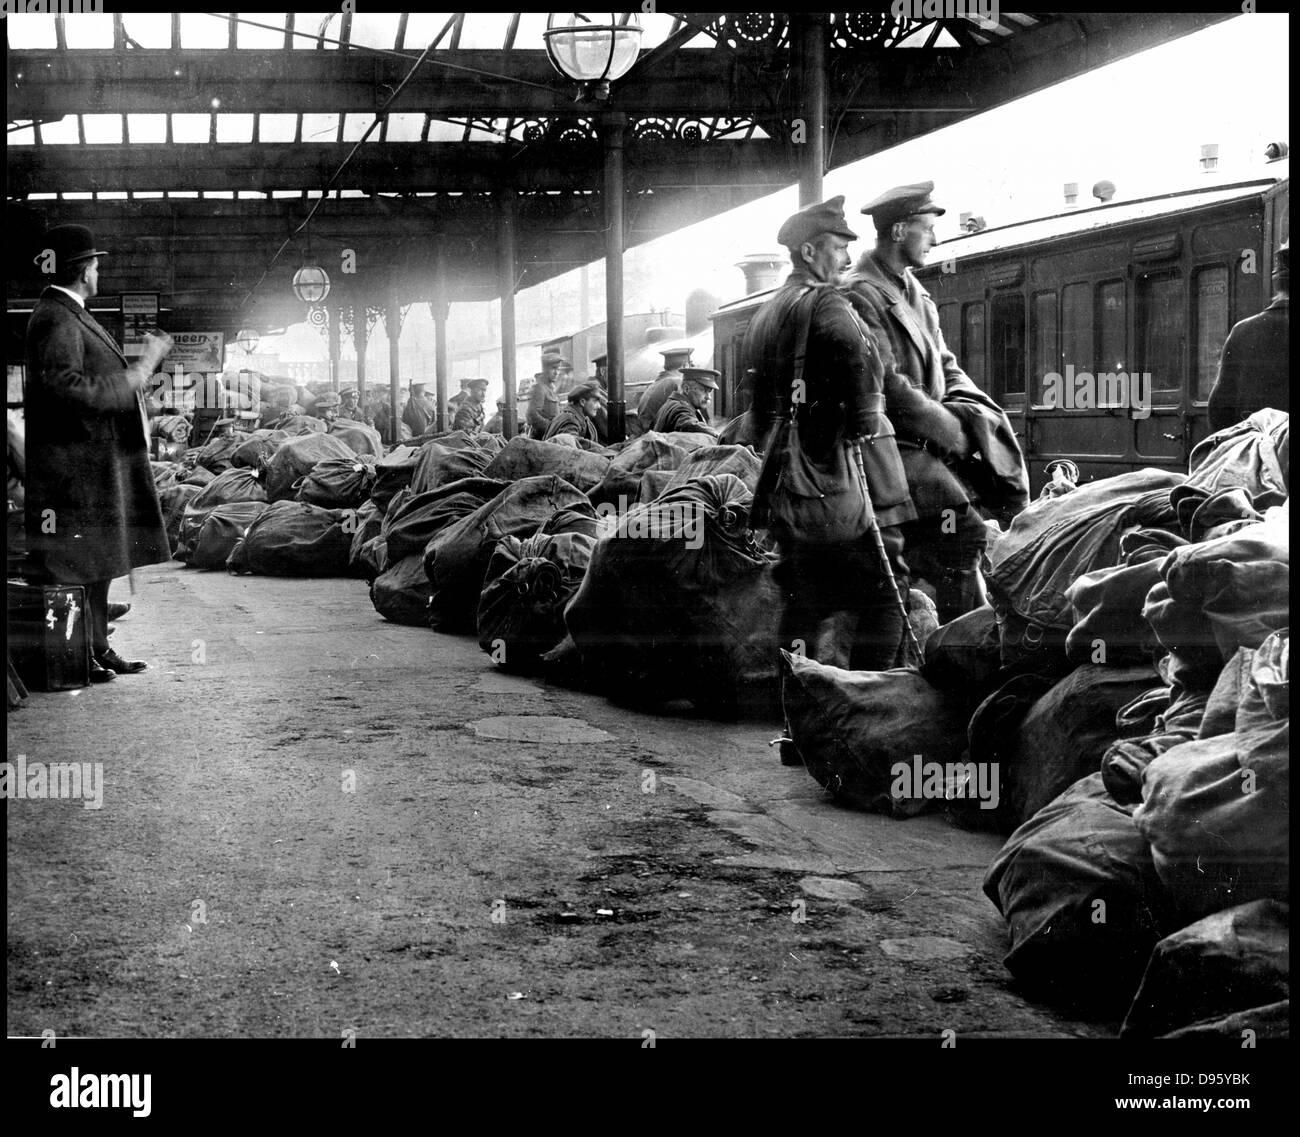 After the anti-English Irish uprising in Dublin, May 1916, public services were disrupted.  Here sacks of mail are piled up on the platform at Dublin station under the guard of British troops, awaiting distributiion. Photograph. Stock Photo